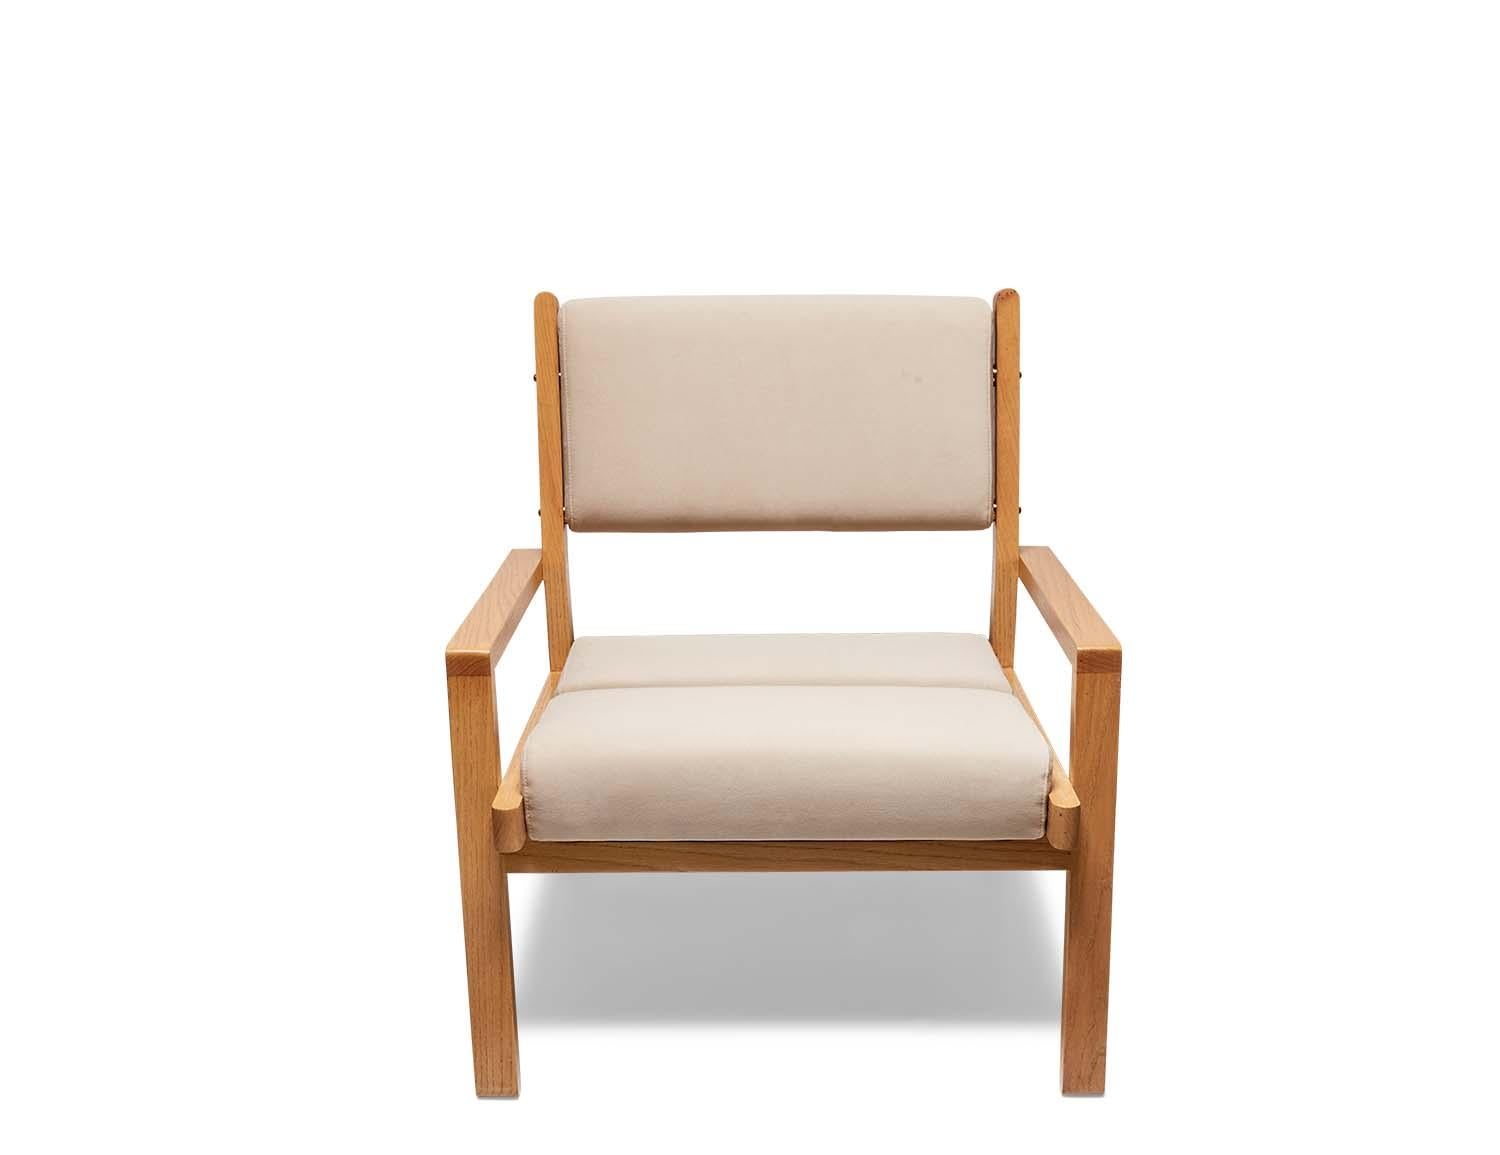 The Morro lounge chair has a solid wood frame with brass spacers and attached tufted cushions. It’s a comfortable chair with a slightly canted back and a pitched seat.

 